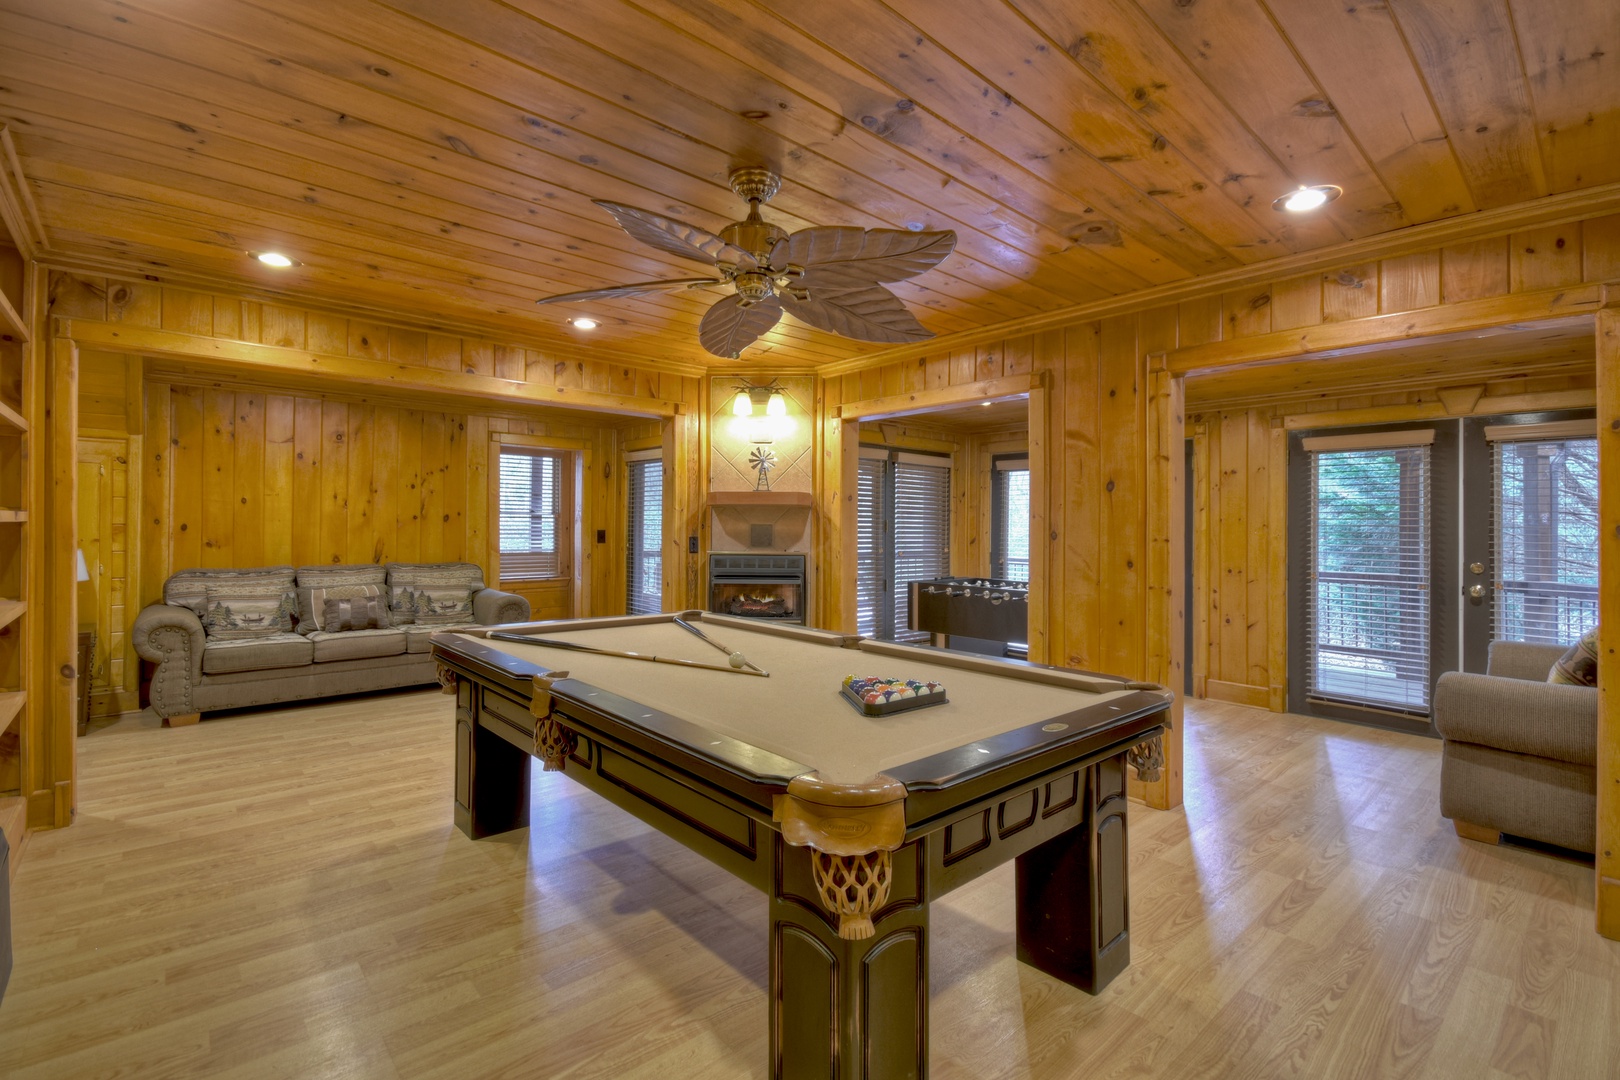 Deer Watch Lodge- Game room with pool table